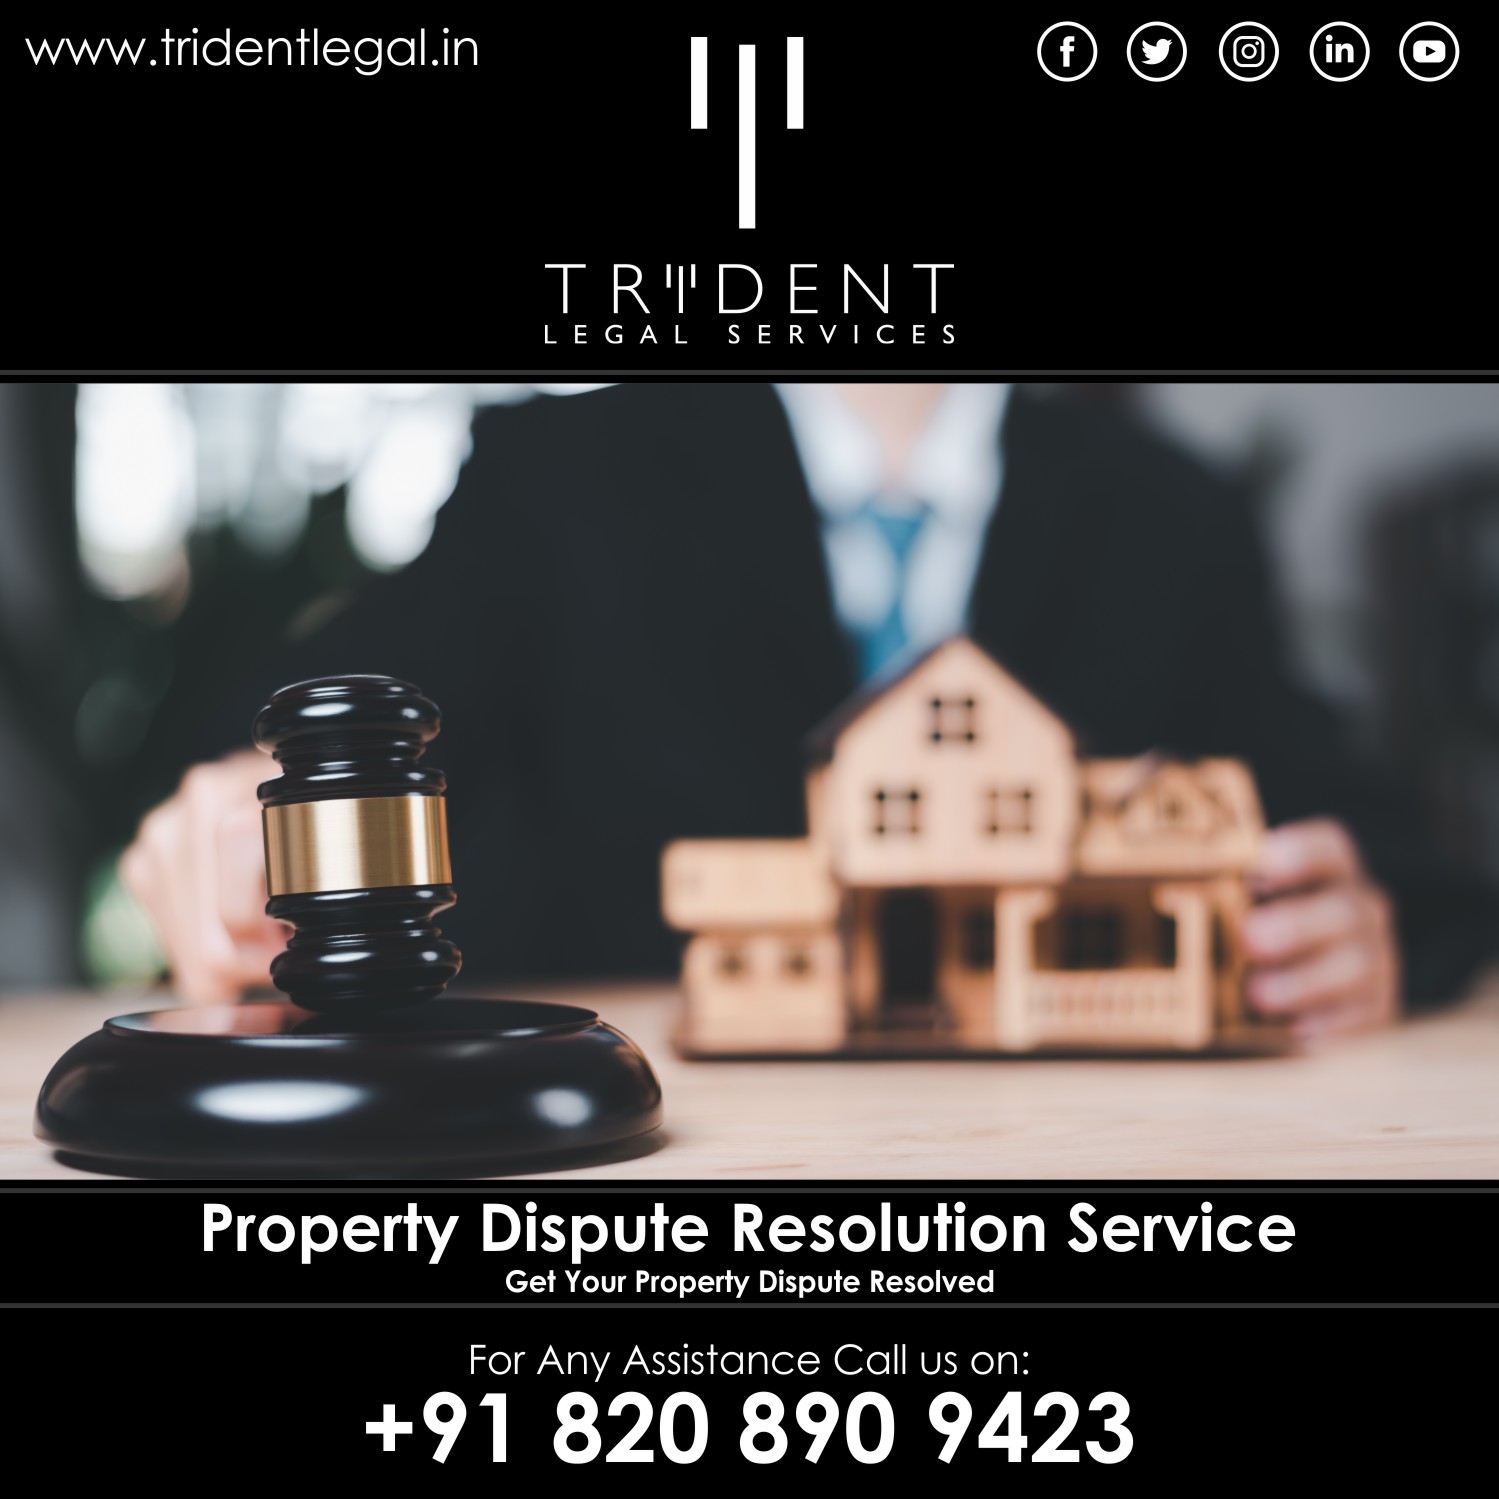 Property Dispute Resolution Service in Pune